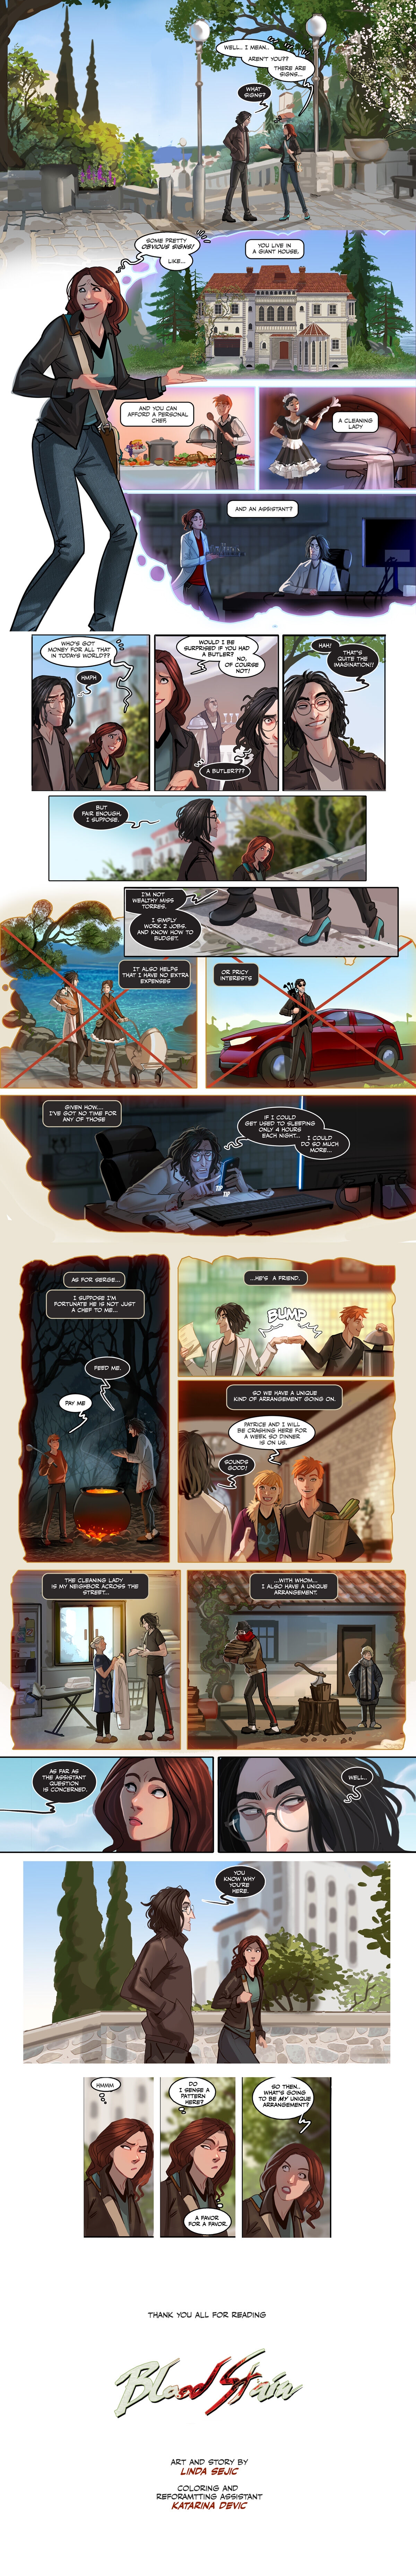 Blood Stain ch. 4 (ongoing) [Linda Sejic / Sigeel] 11